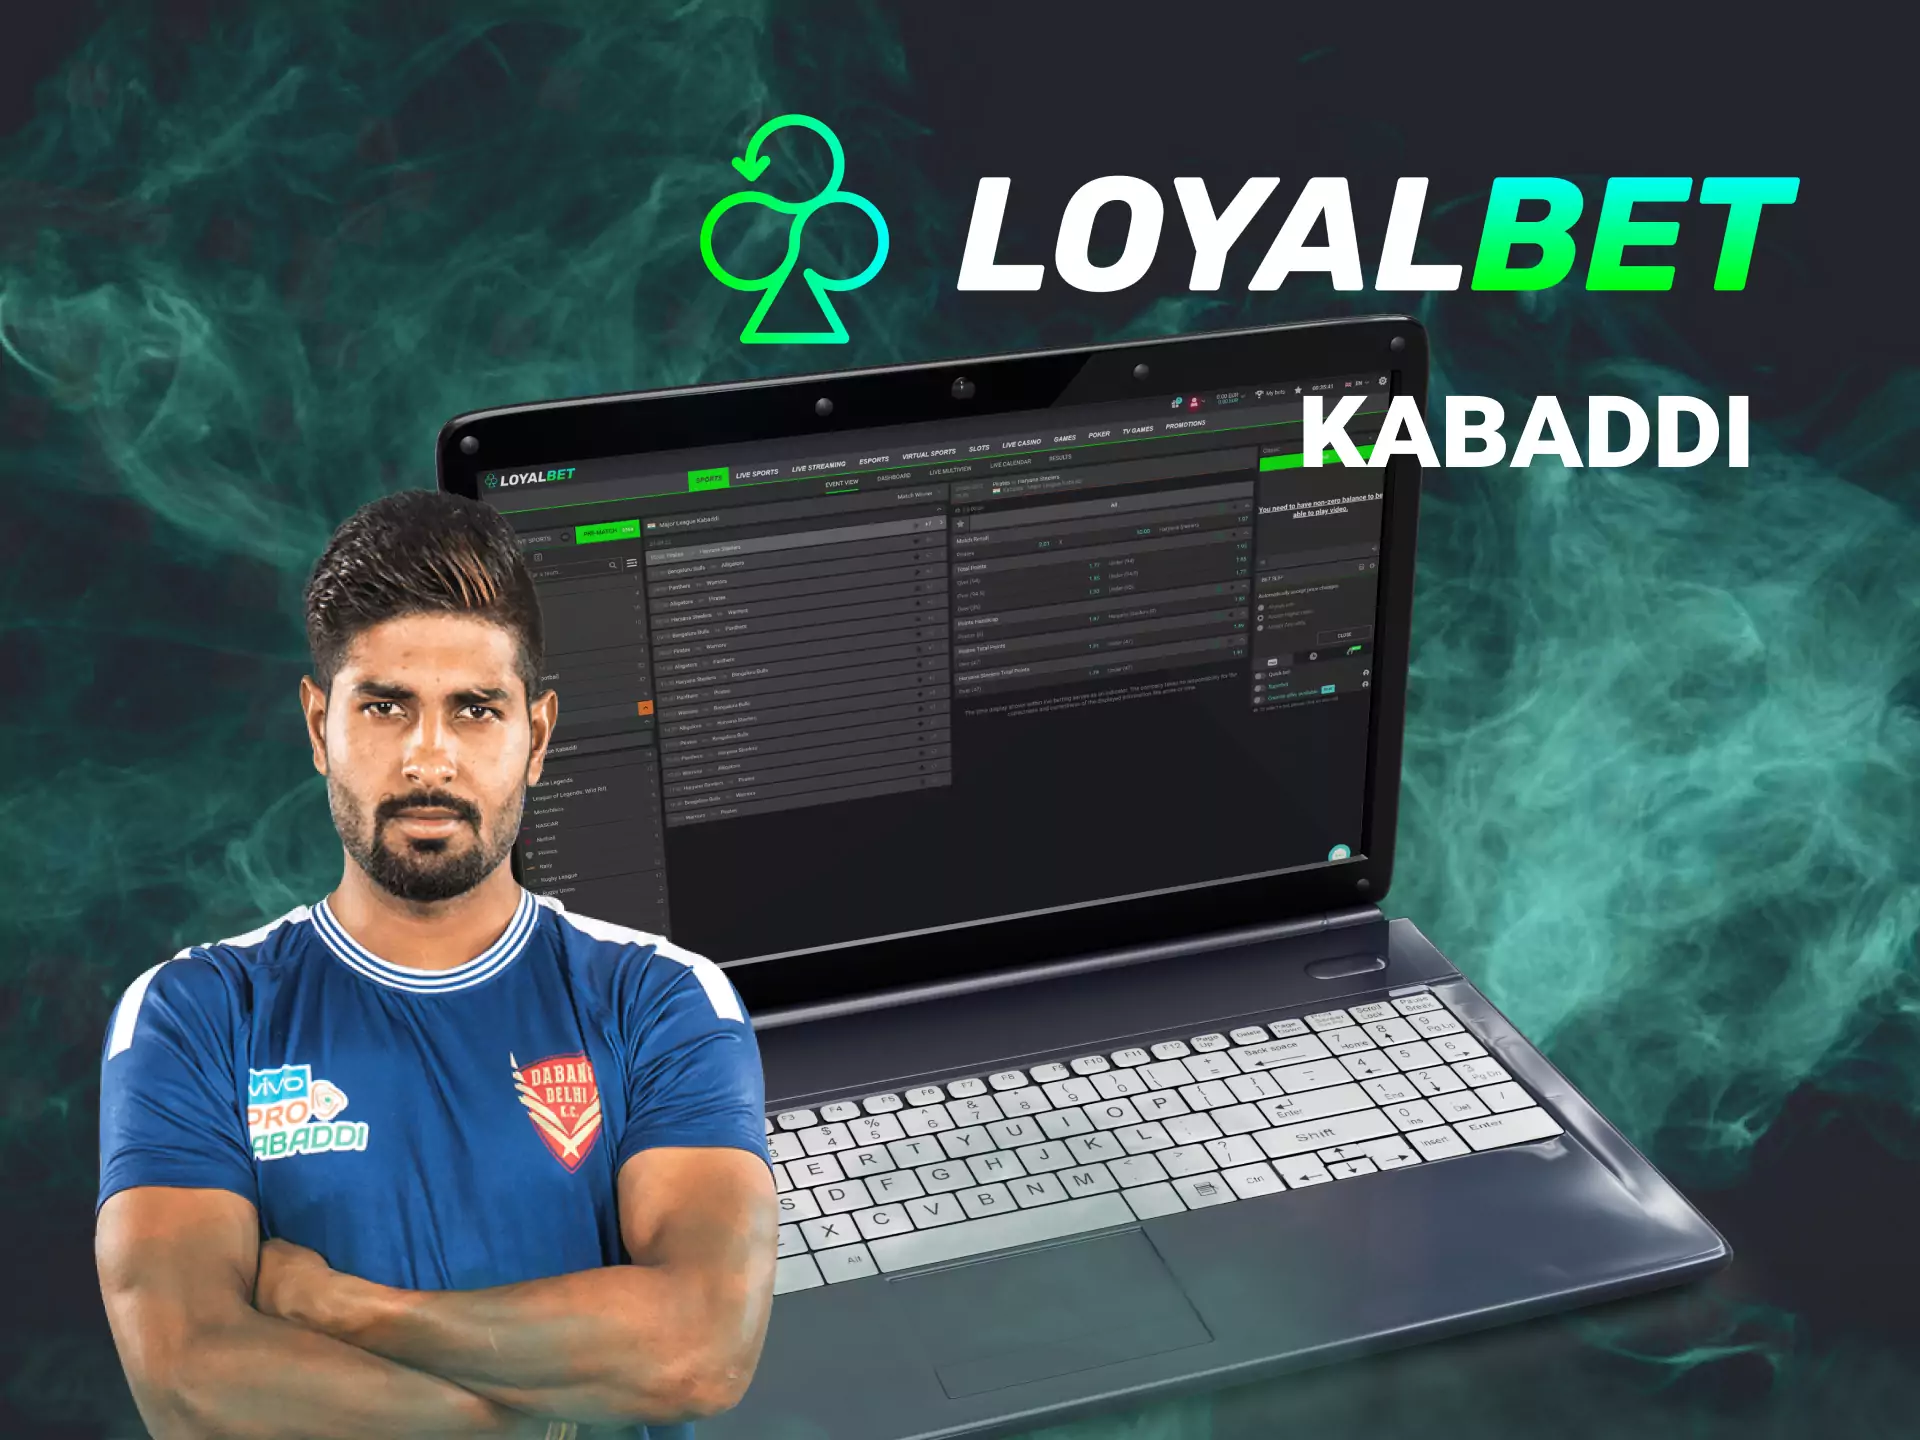 Kabaddi is also among the sports disciplines on the Loyalbet website.